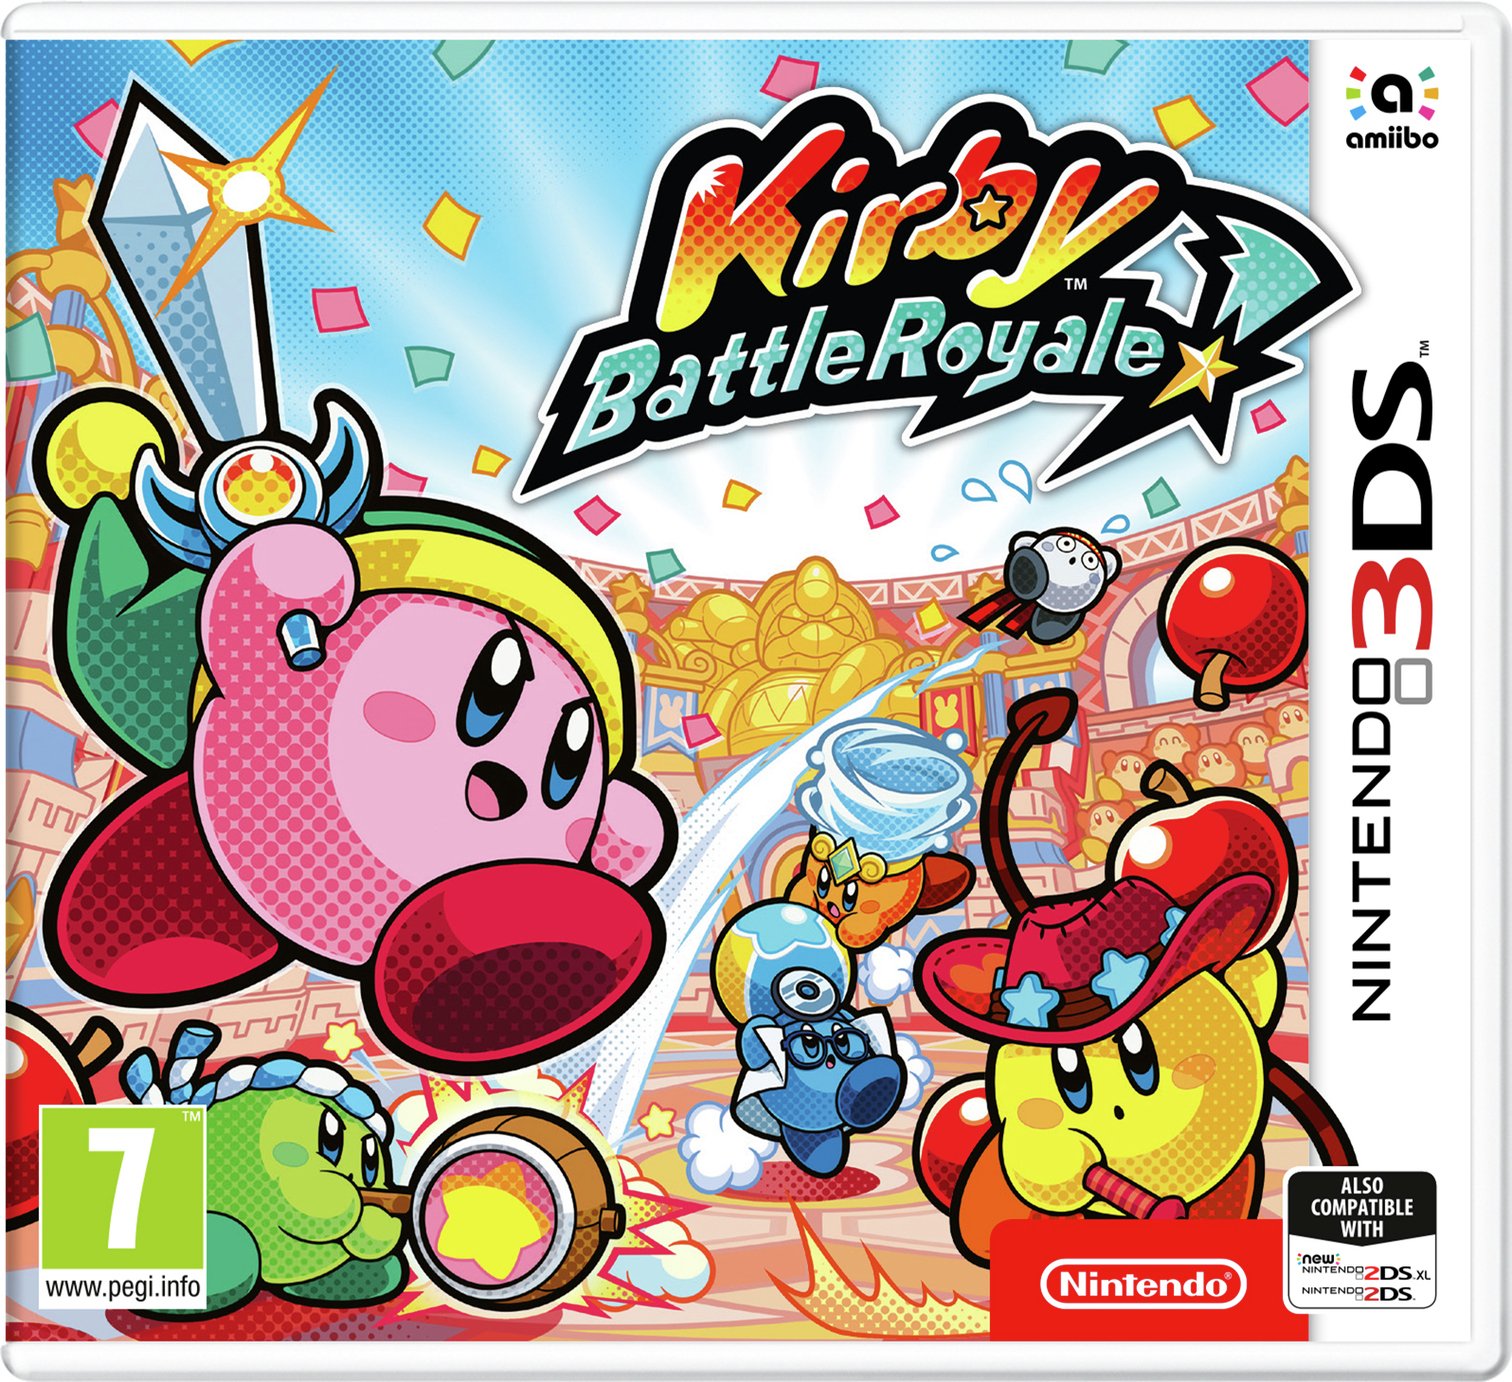 Kirby: Battle Royale Nintendo 3DS Game Review